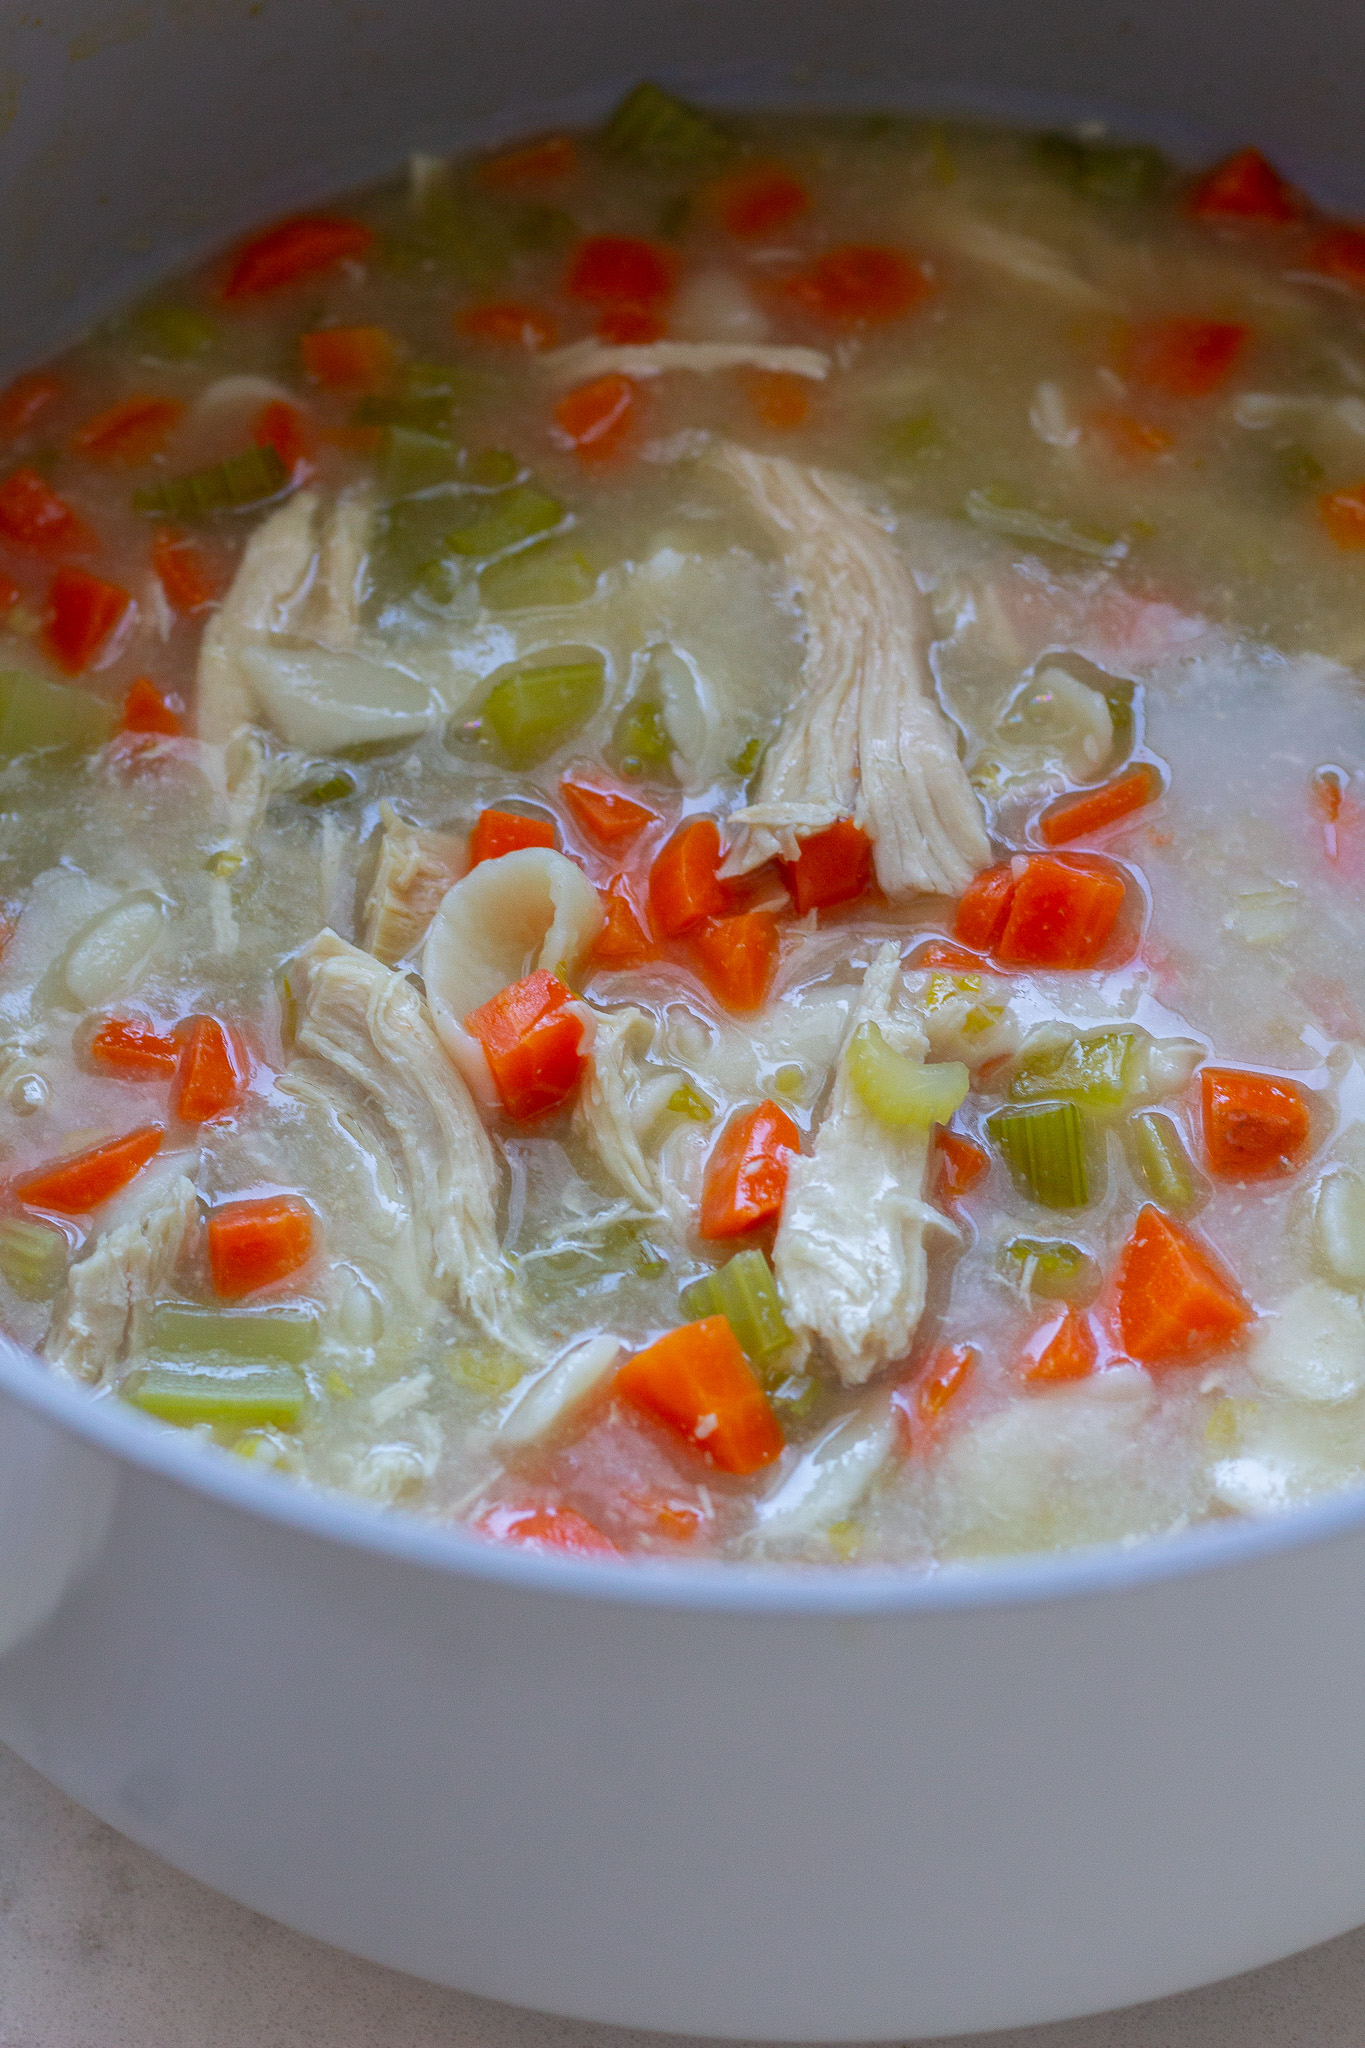 Old Fashioned Bone Broth Chicken Noodle Soup - Handmade Farmhouse